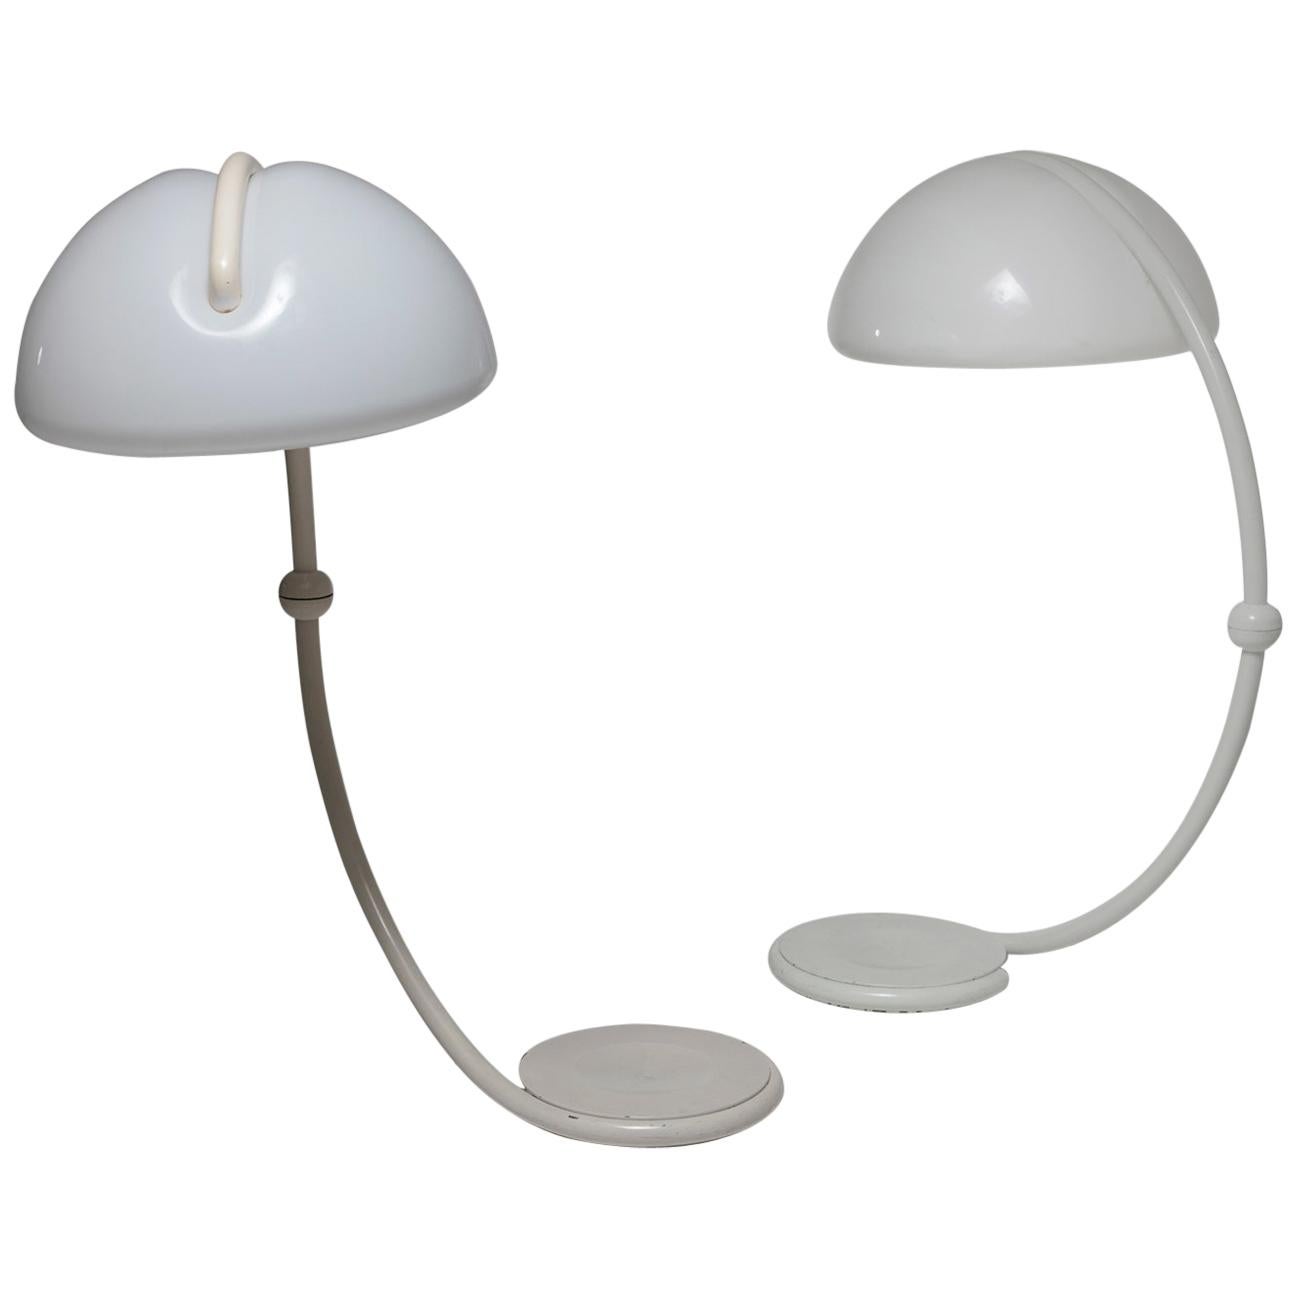 Pair of "Serpente" Floor Lamps by Elio Martinelli for Martinelli Luce